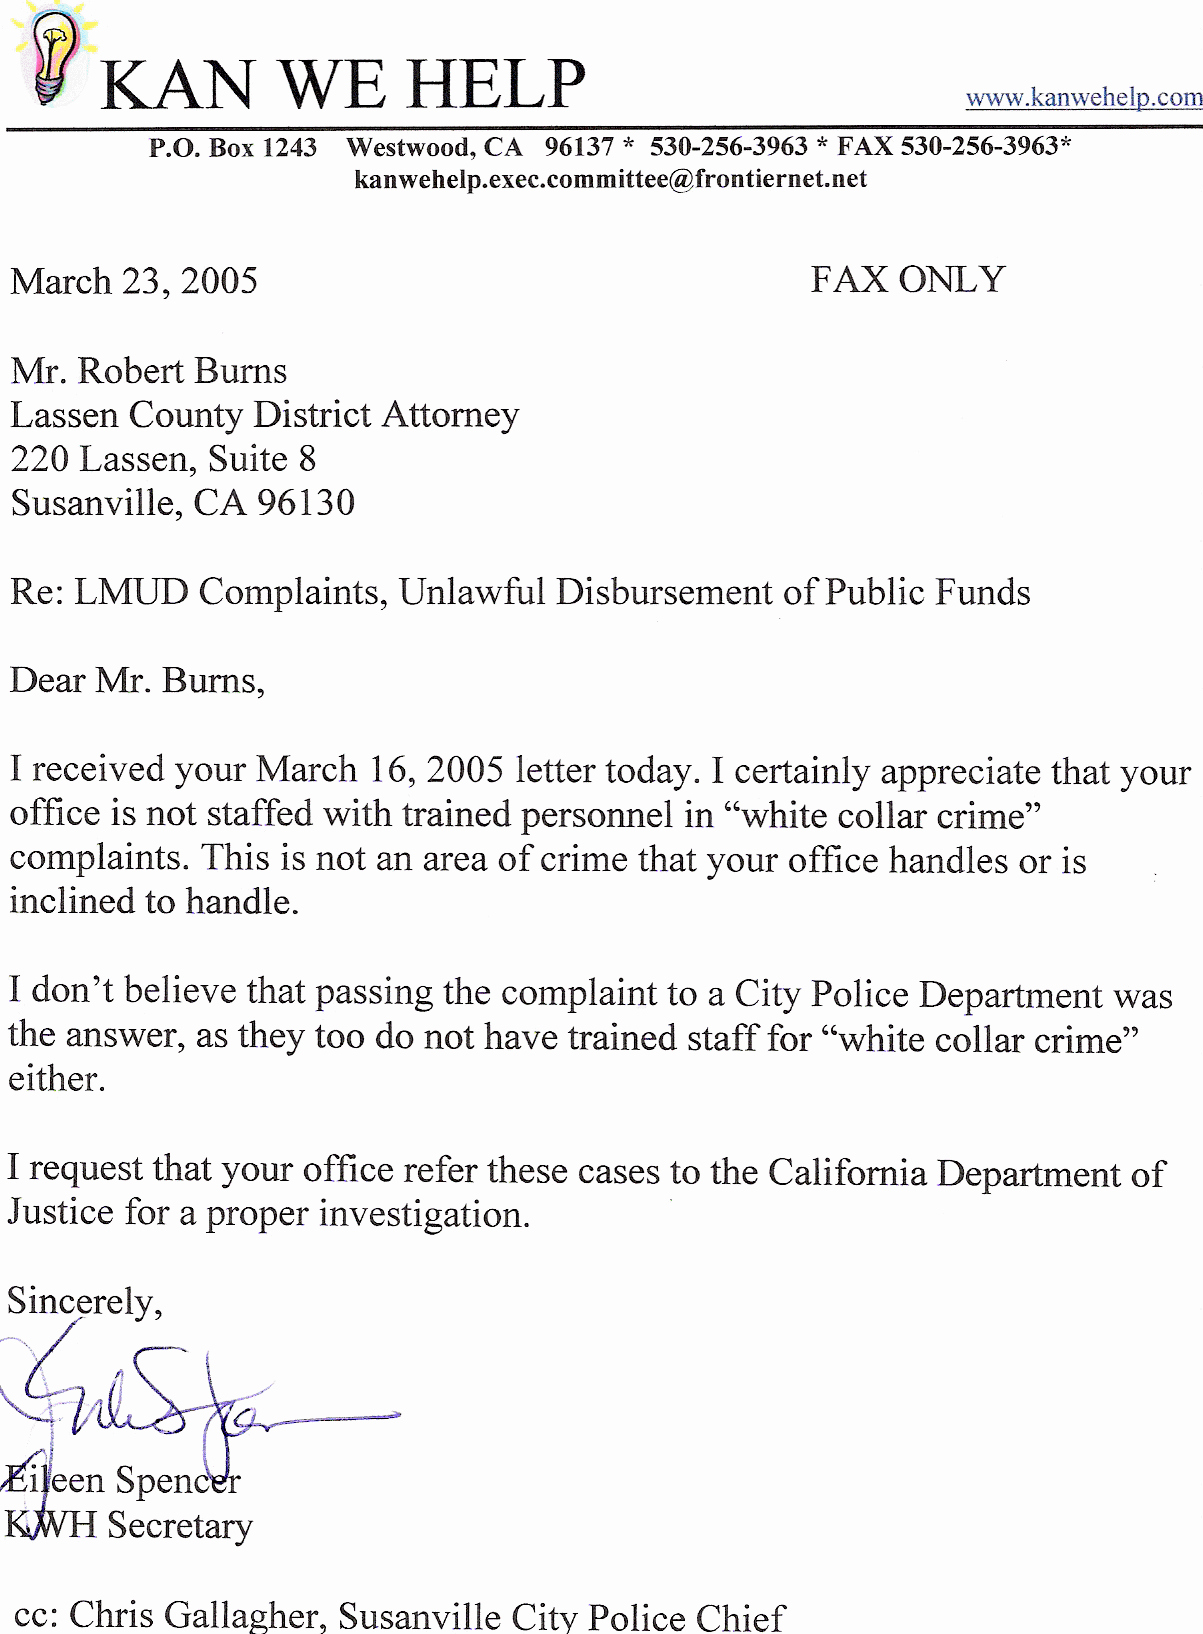 sample letter how to fire my attorney